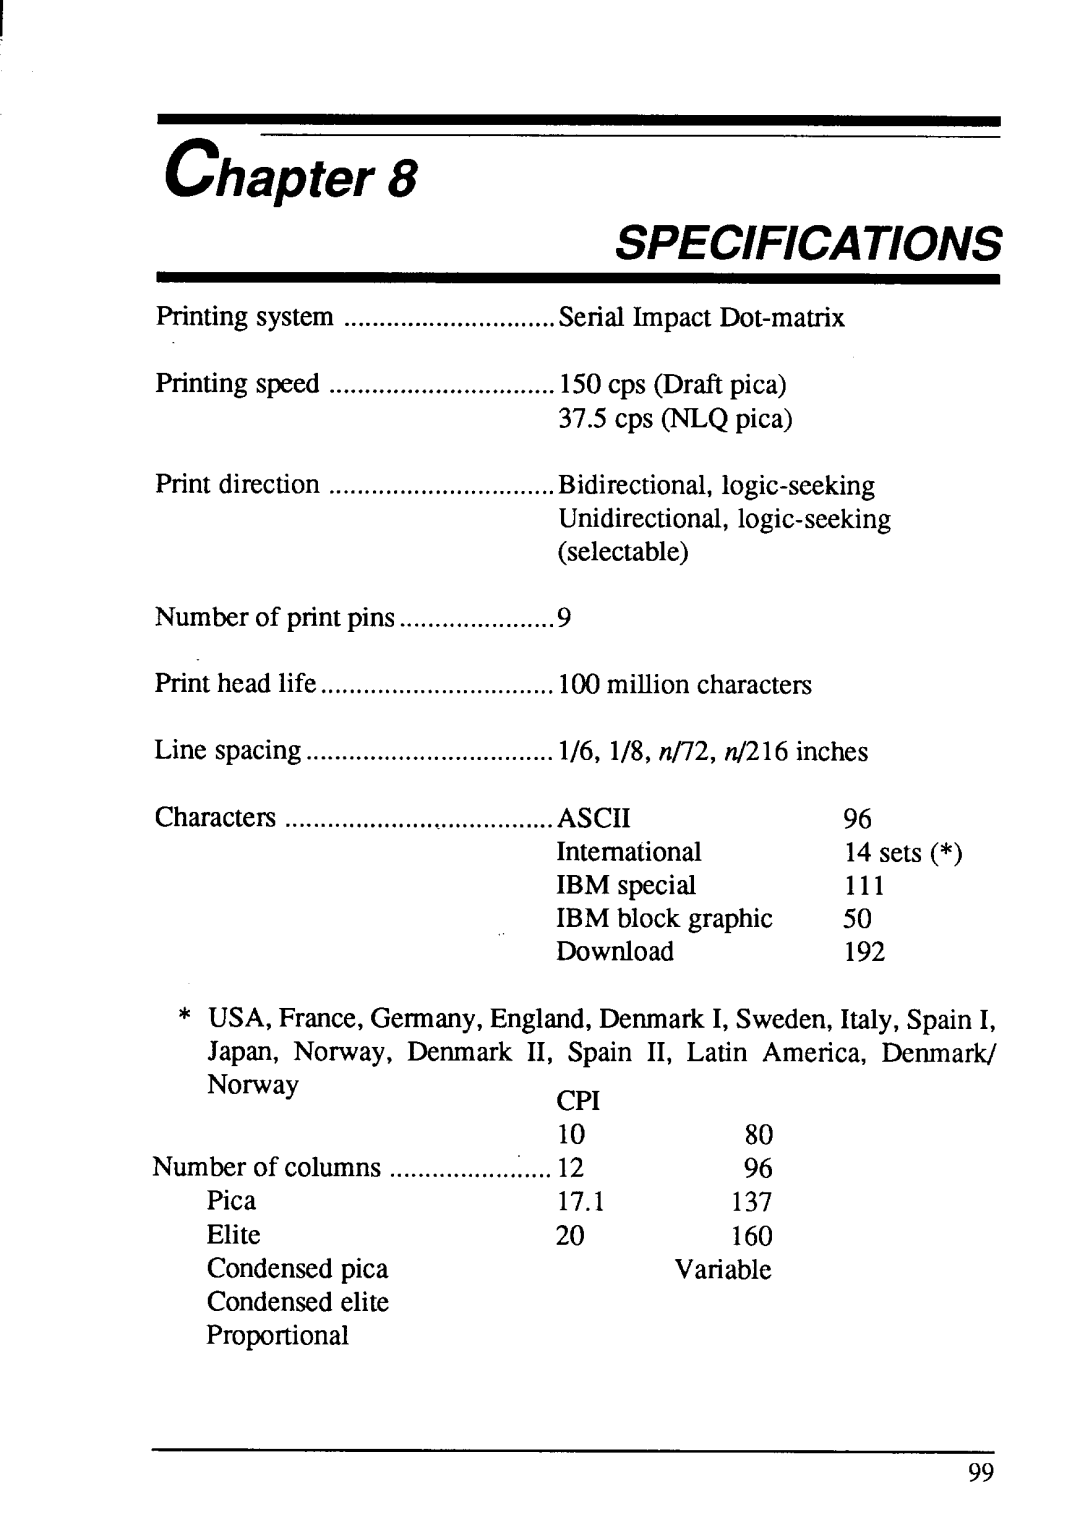 Star Micronics NX-1001 manual I chapter, Specifications 